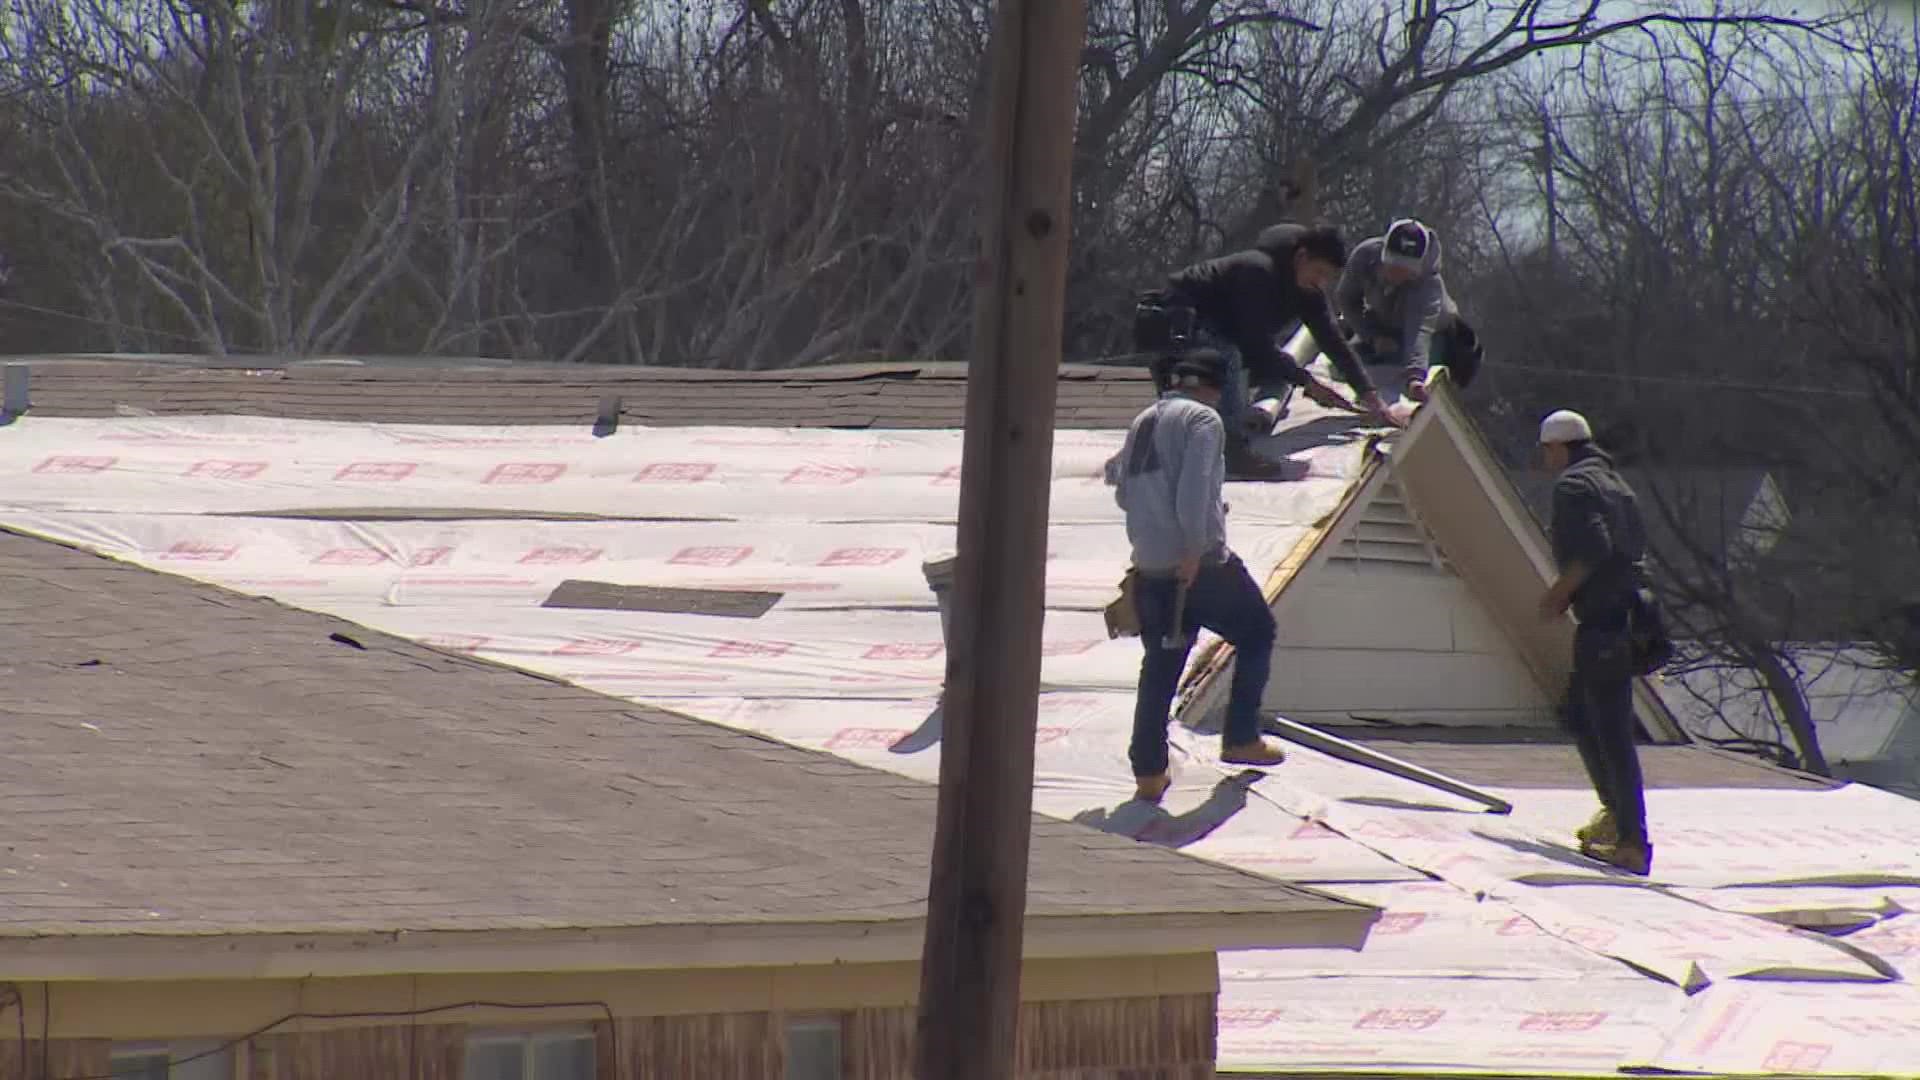 Tornadoes devastated Jacksboro earlier this week, but the residents are already making progress in getting back to normal.